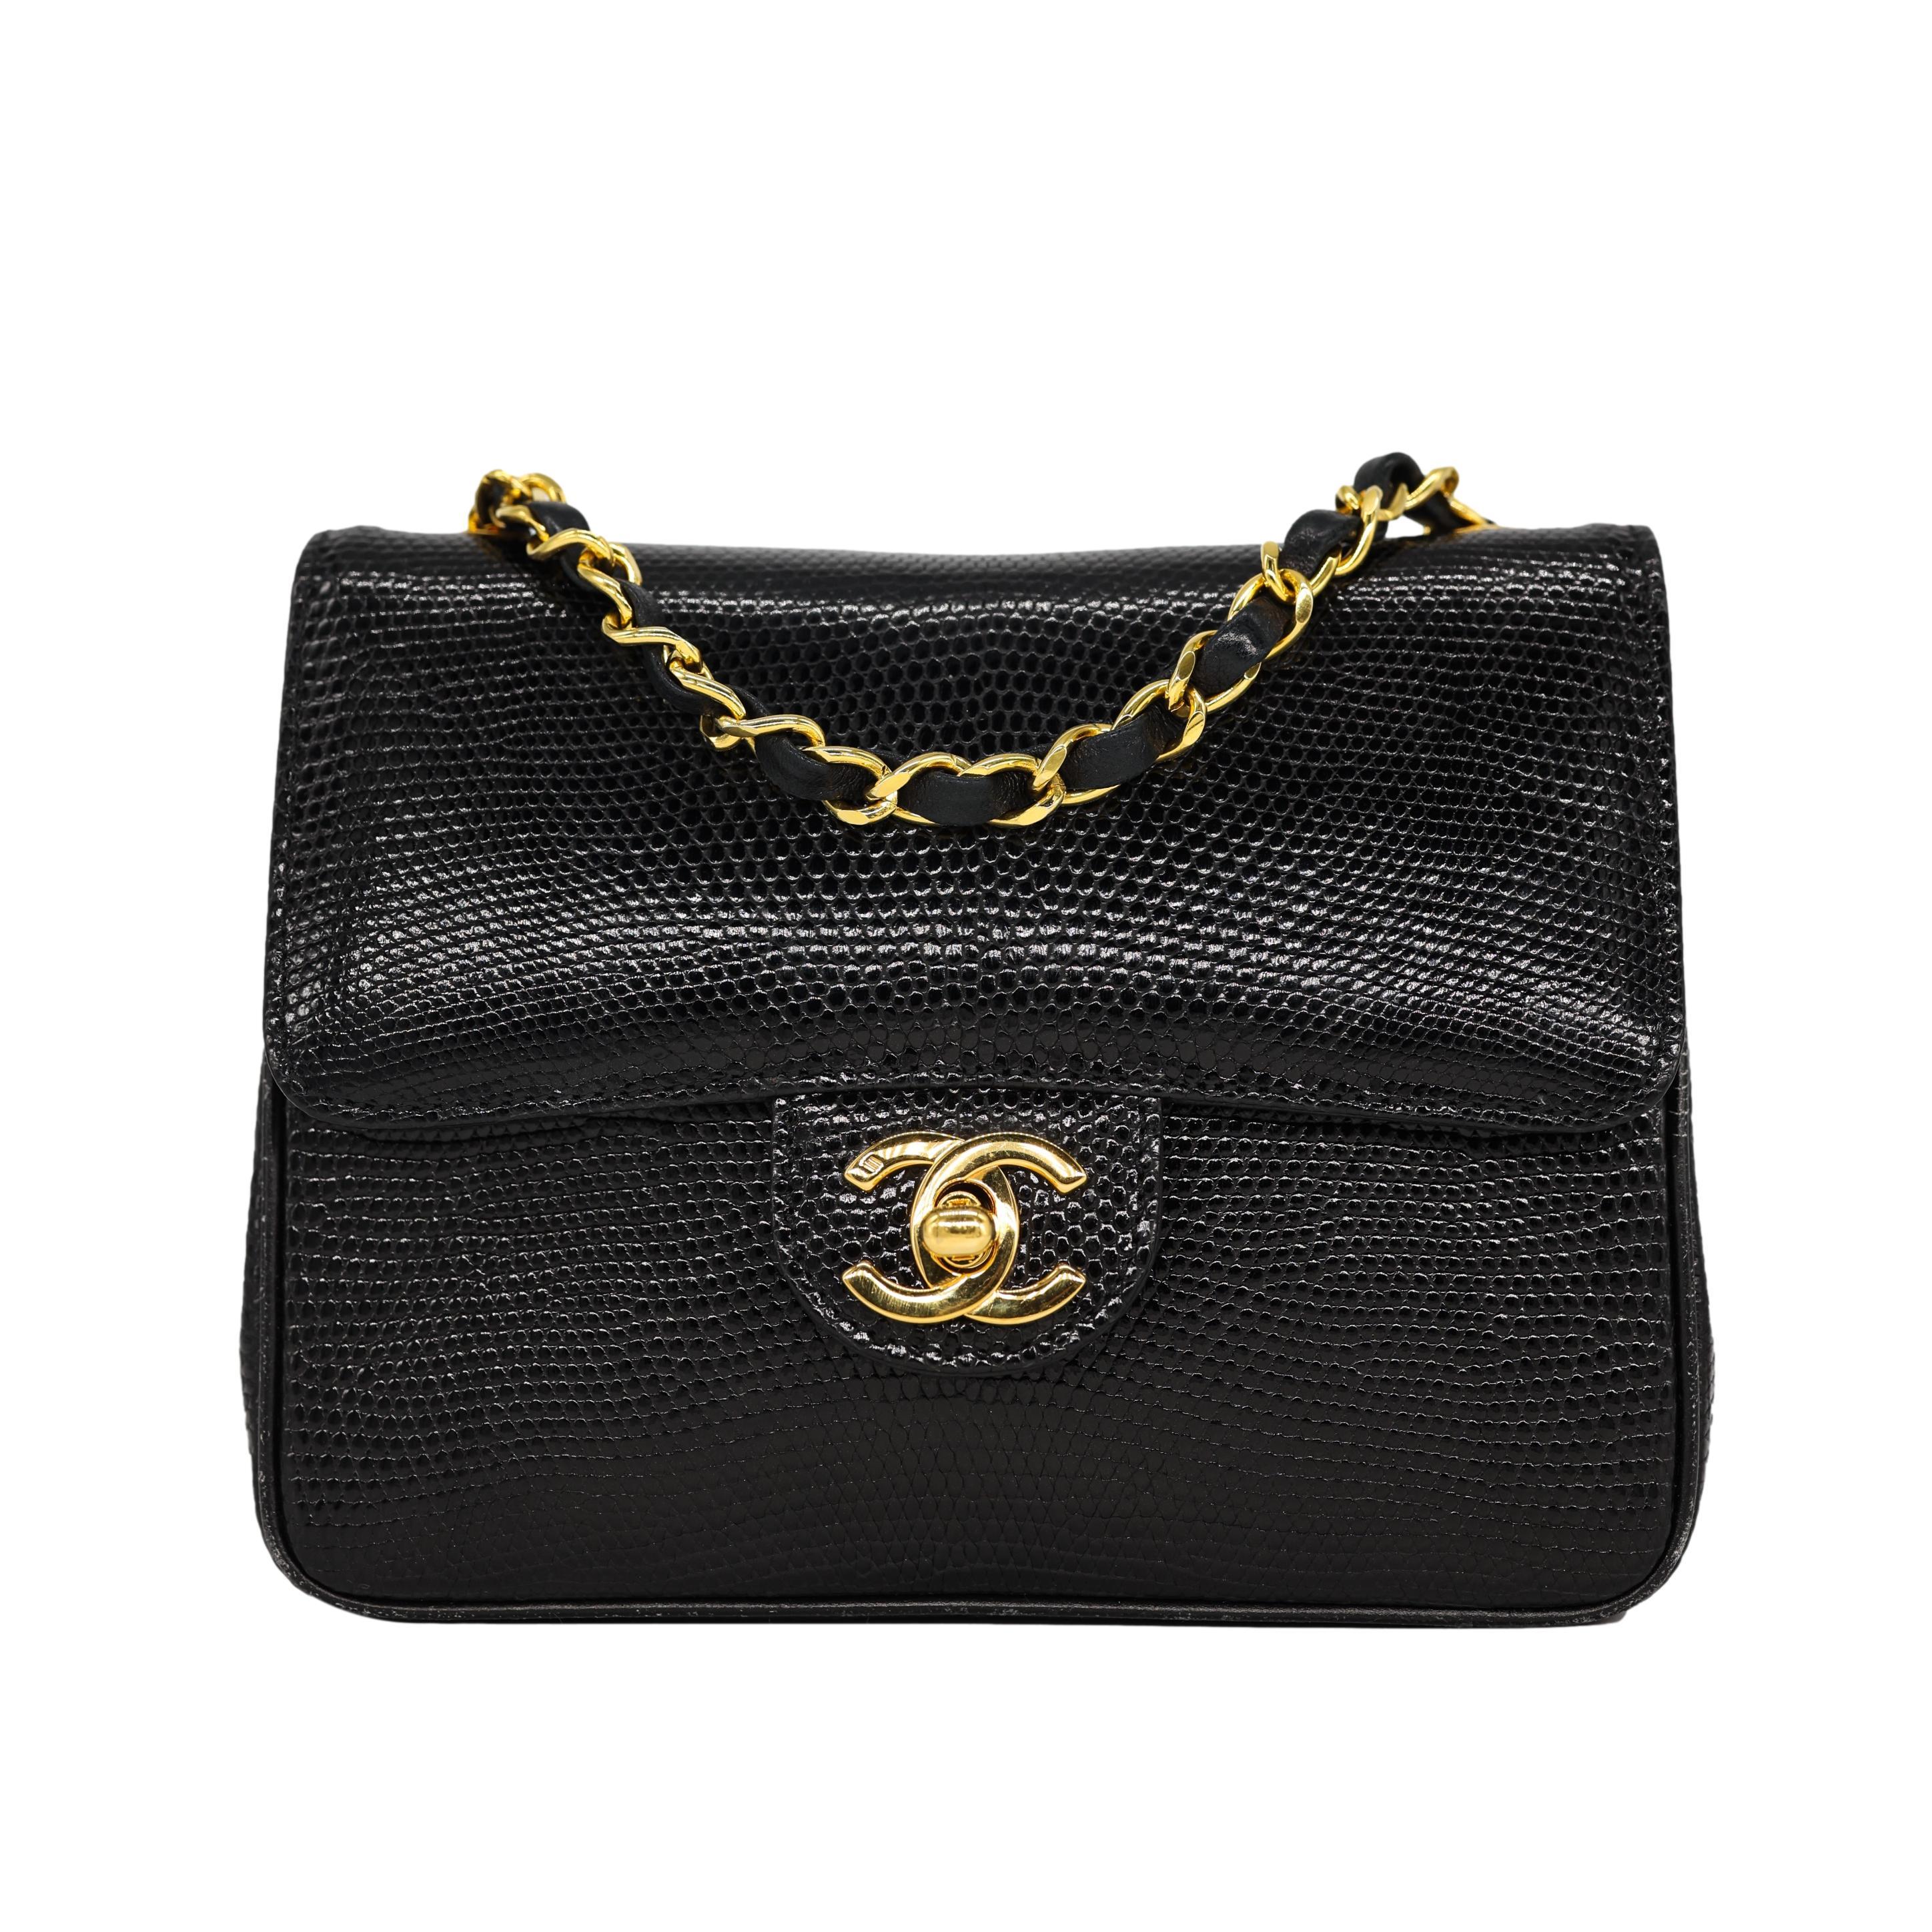 Chanel Vintage Mini Black Lizard Envelope Cross Body Flap Bag with 24KT Gold Hardware. Exceptional and rare, this highly sought after piece of Chanel history was produced between 1986 - 1988 baring a serial code of 